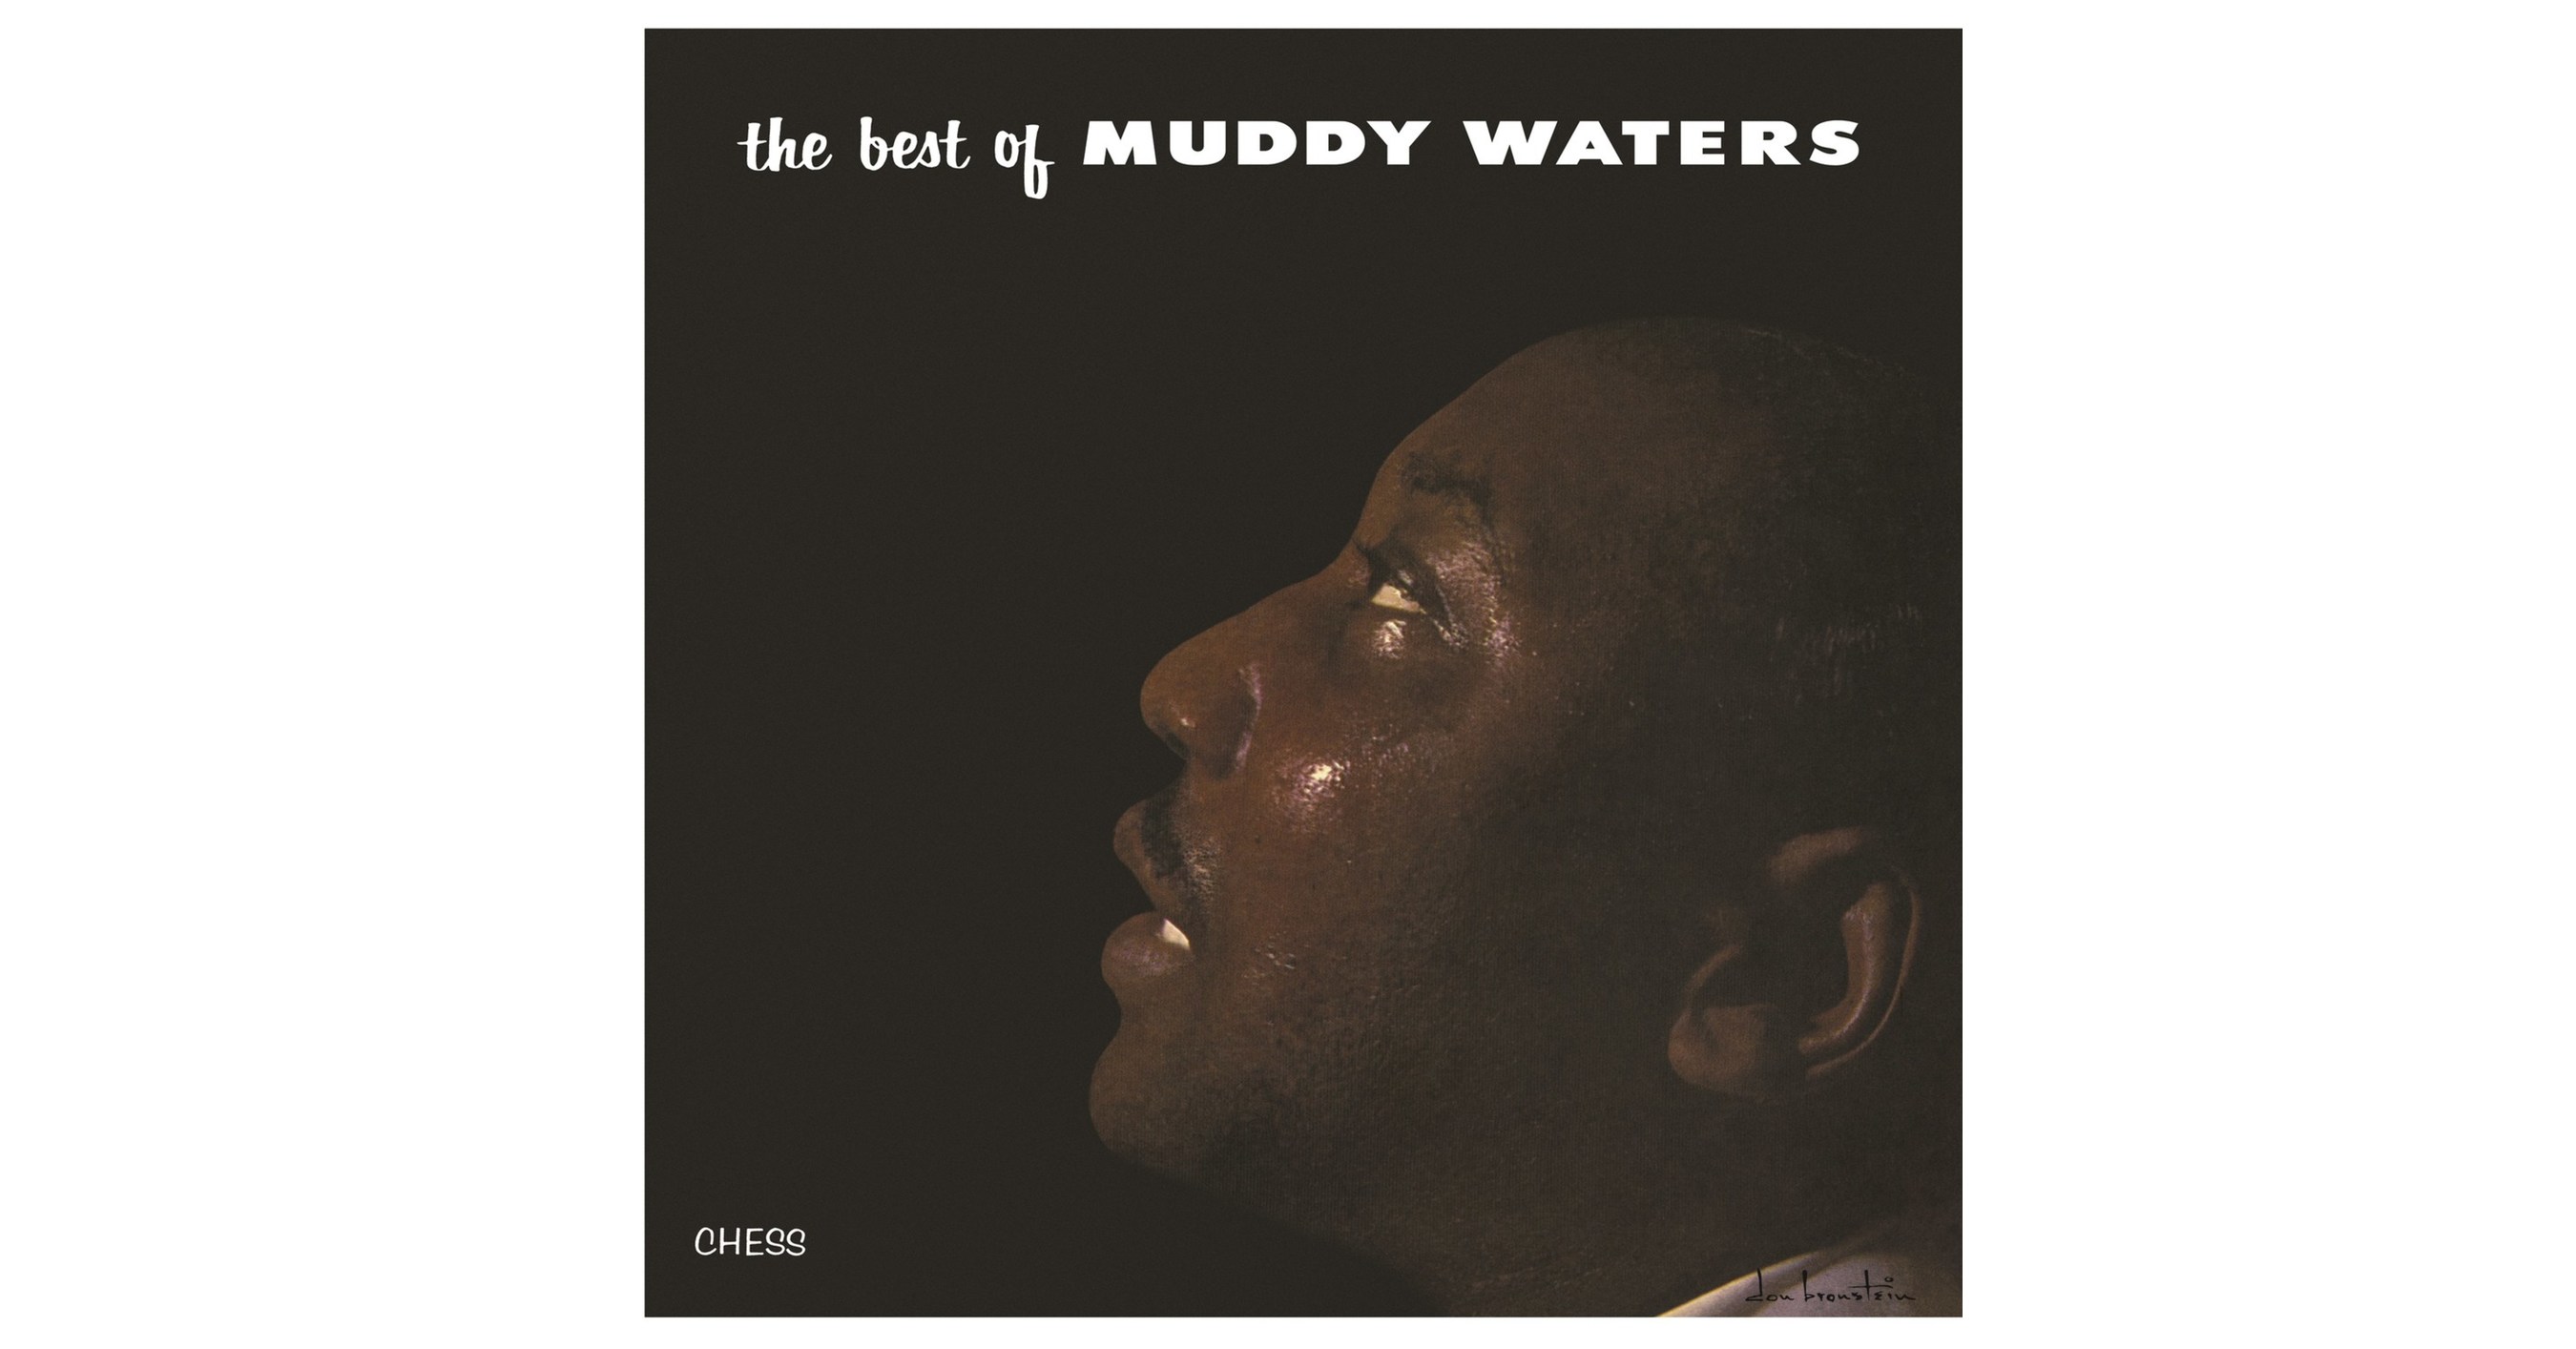 Muddy Waters Seminal Debut Lp The Best Of Muddy Waters To Be Reissued On Vinyl For First Time In 30 Years On November 10 Via Geffen Ume